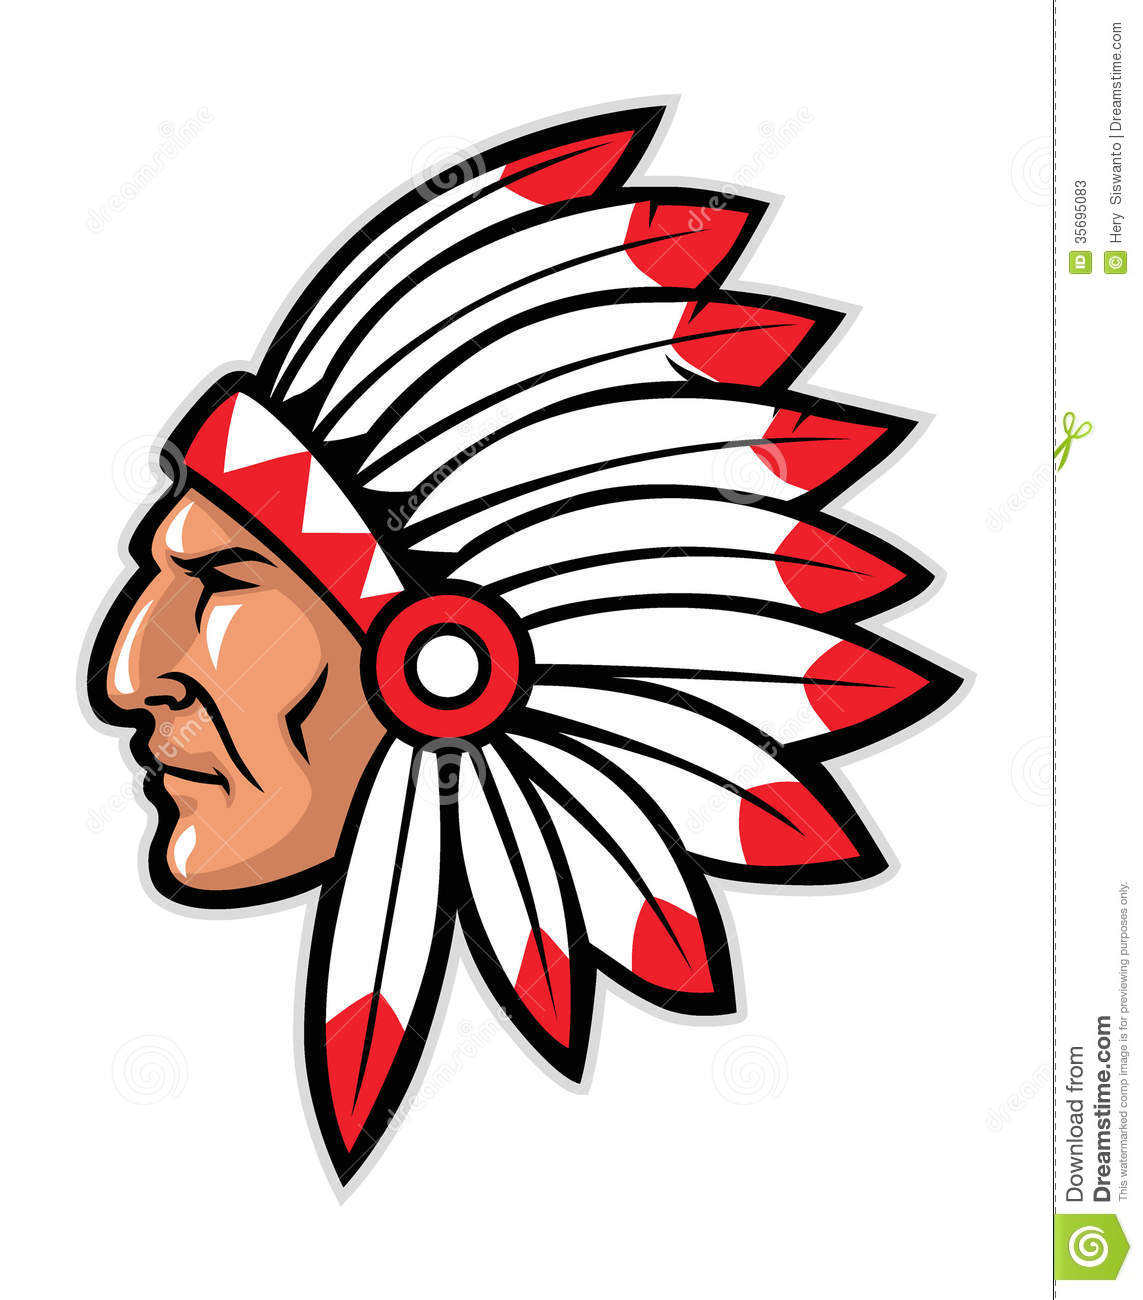 Vector Of Indian Head Mascot Suitable As A Sport Team Or Club Mascot